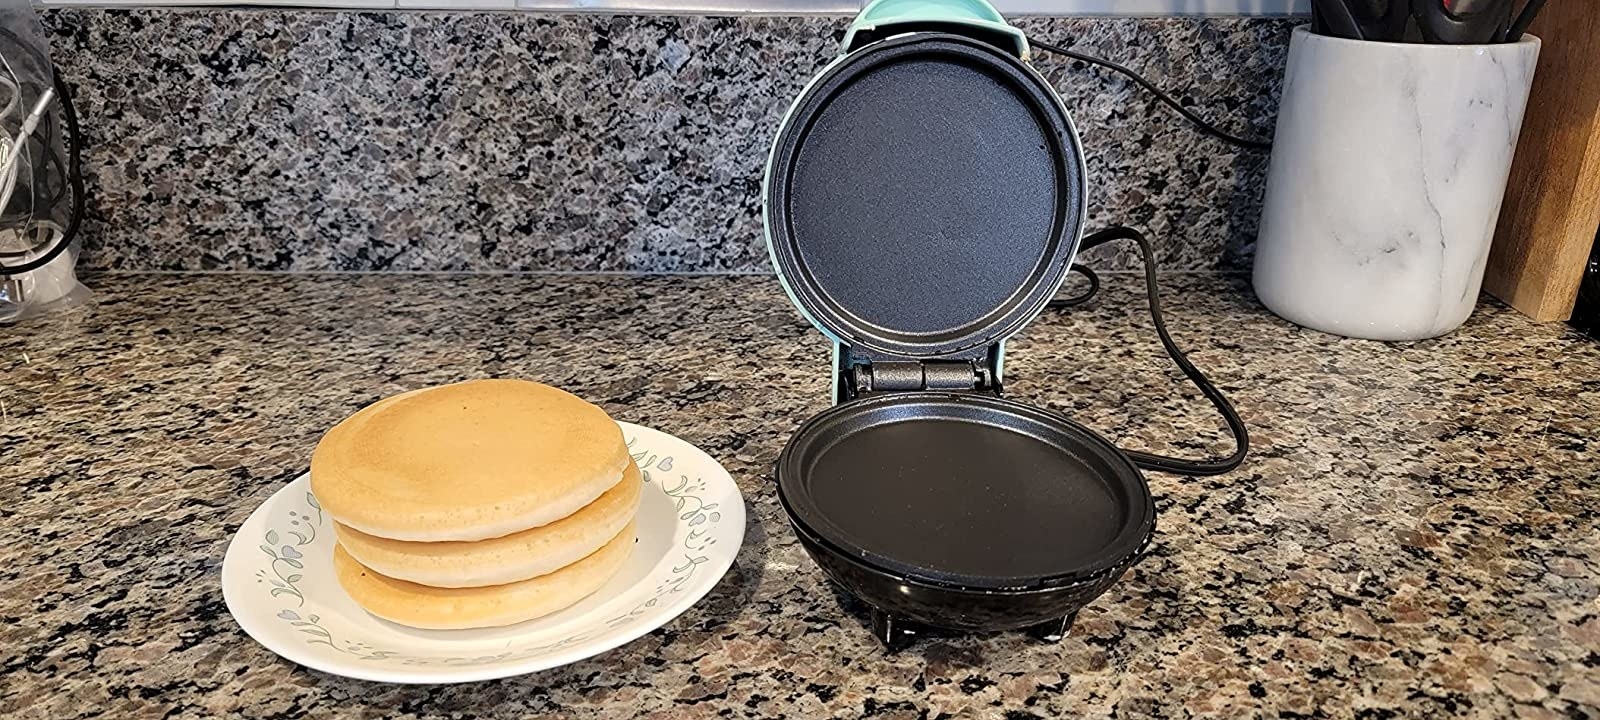 Reviewer image of round griddle and a plate of pancakes